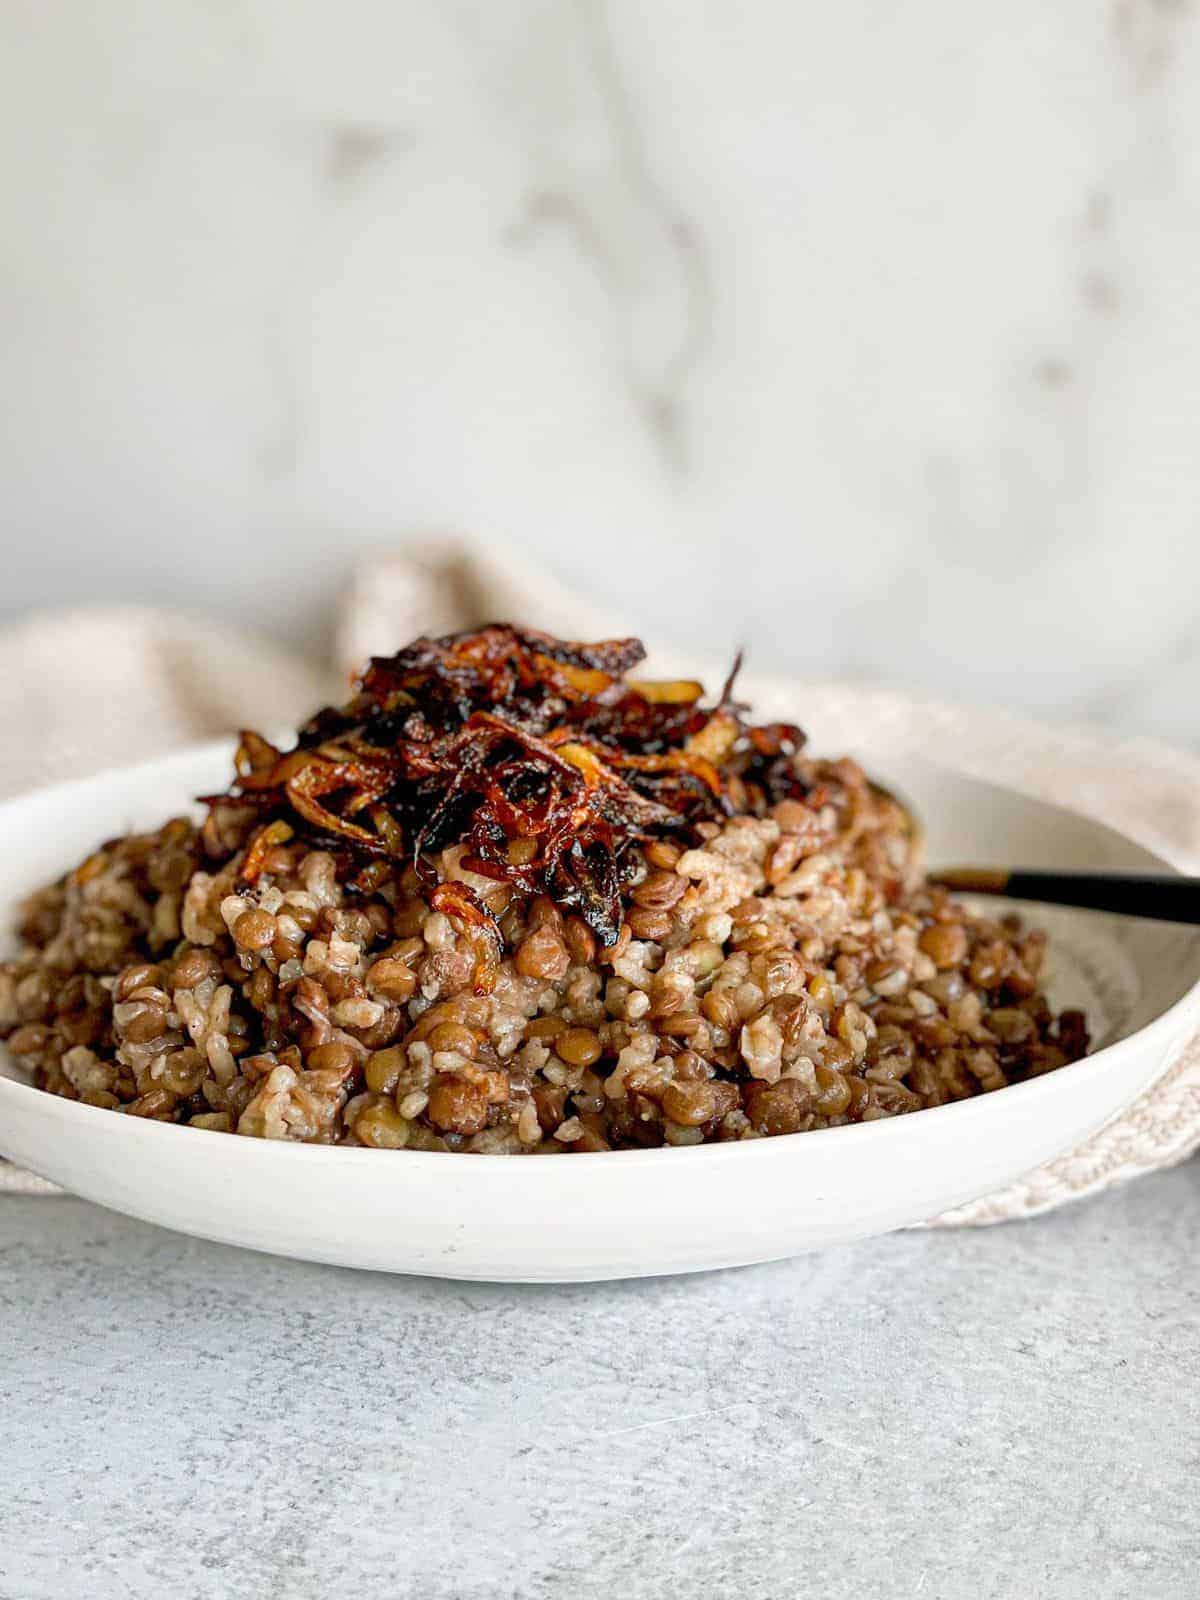 A dish loaded with Lebanese lentils and rice recipe (Mujadaret Roz) topped with caramelized onions.